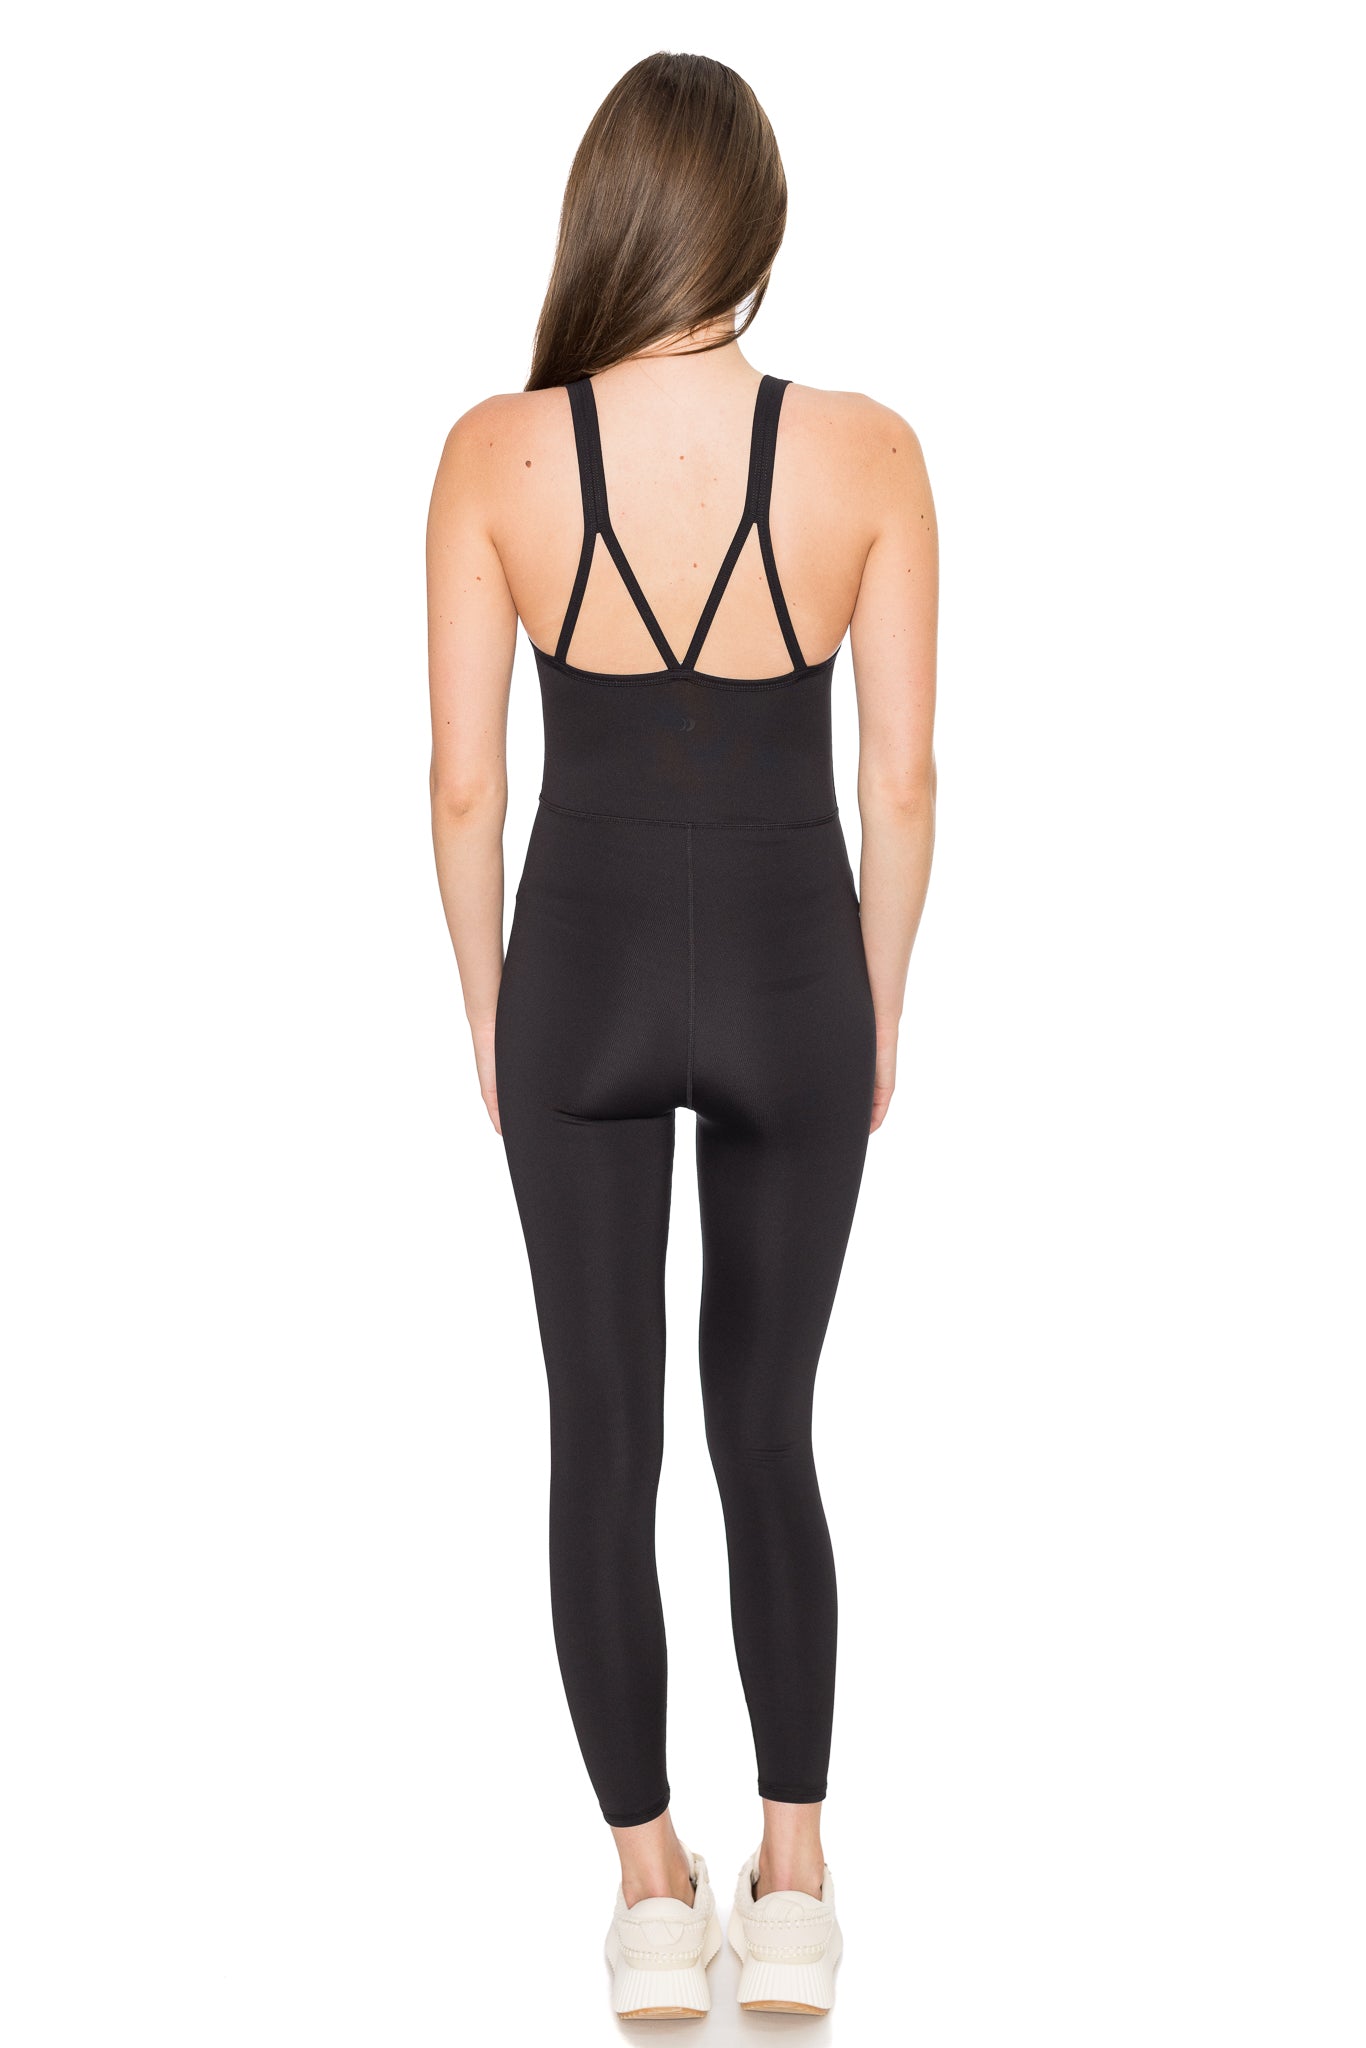 Go For It Rib Jumpsuit by Z Supply